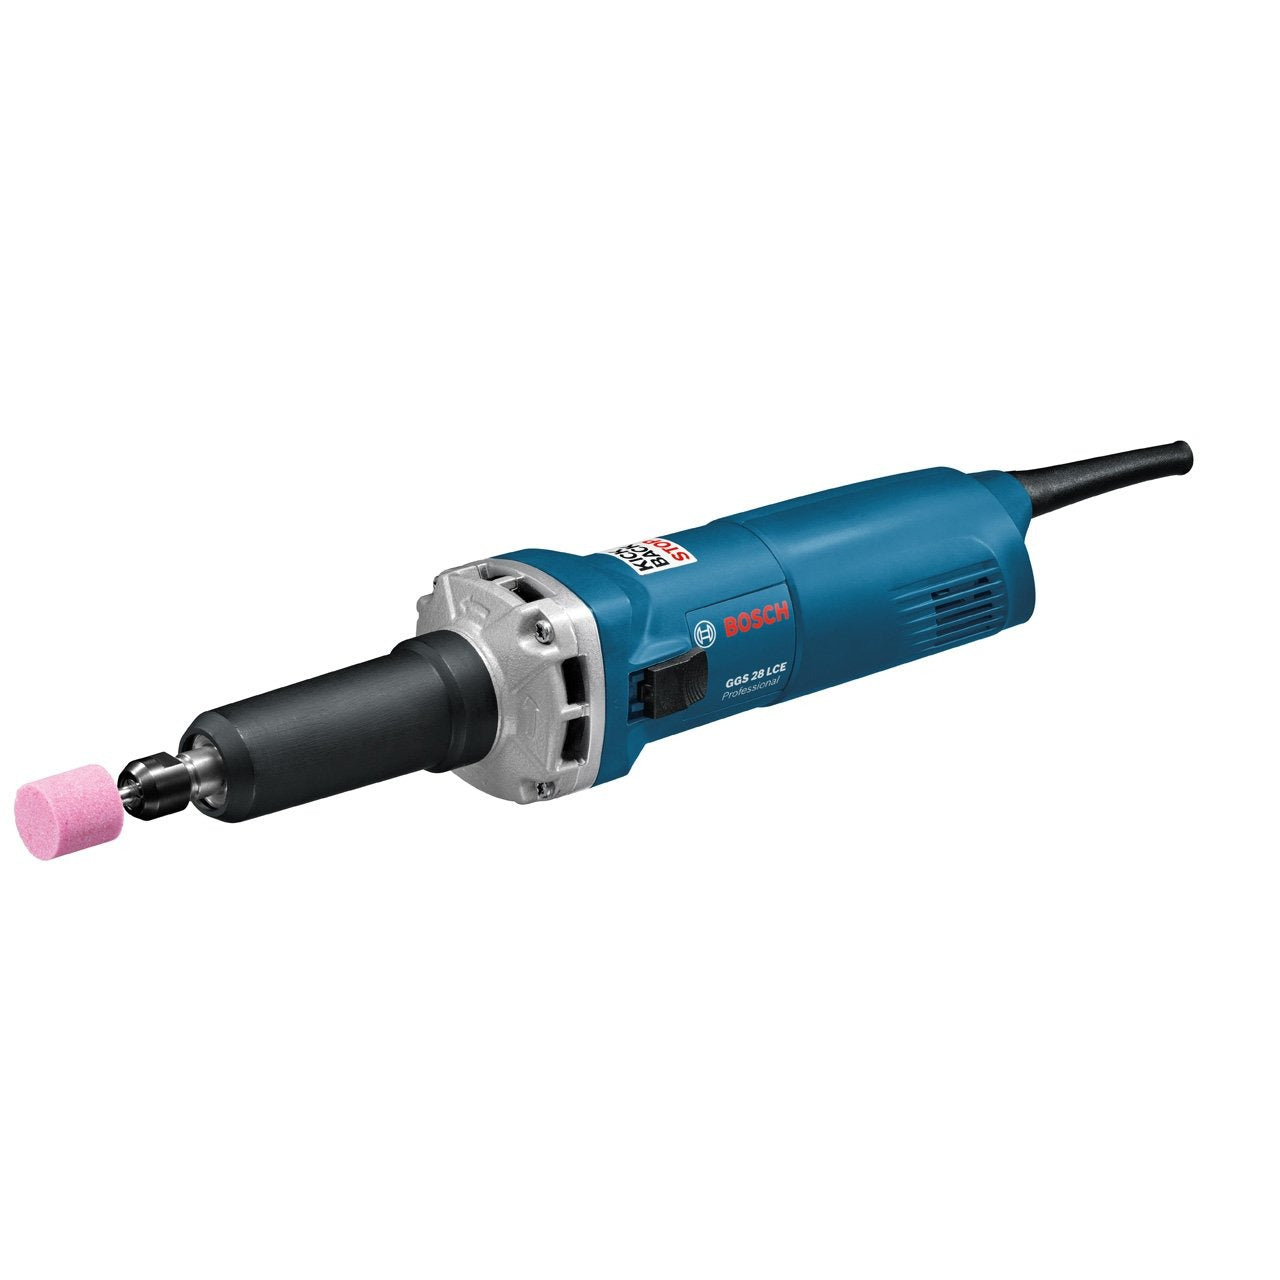 Bosch GGS 28 LCE Professional Straight Grinder